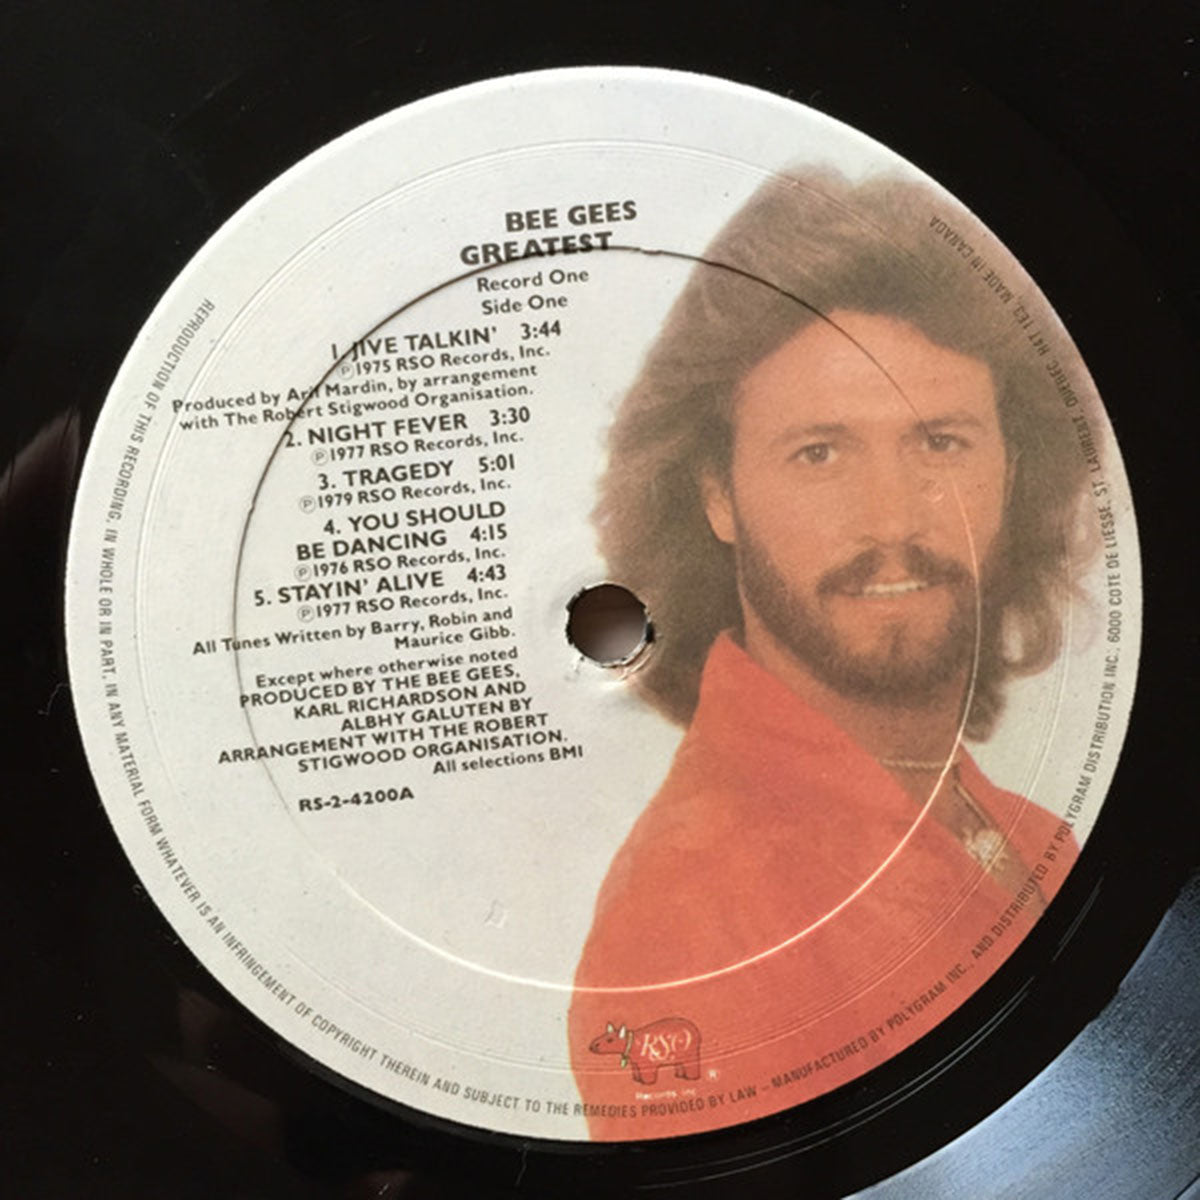 Bee Gees ‎– Greatest - 1979 Pressing!